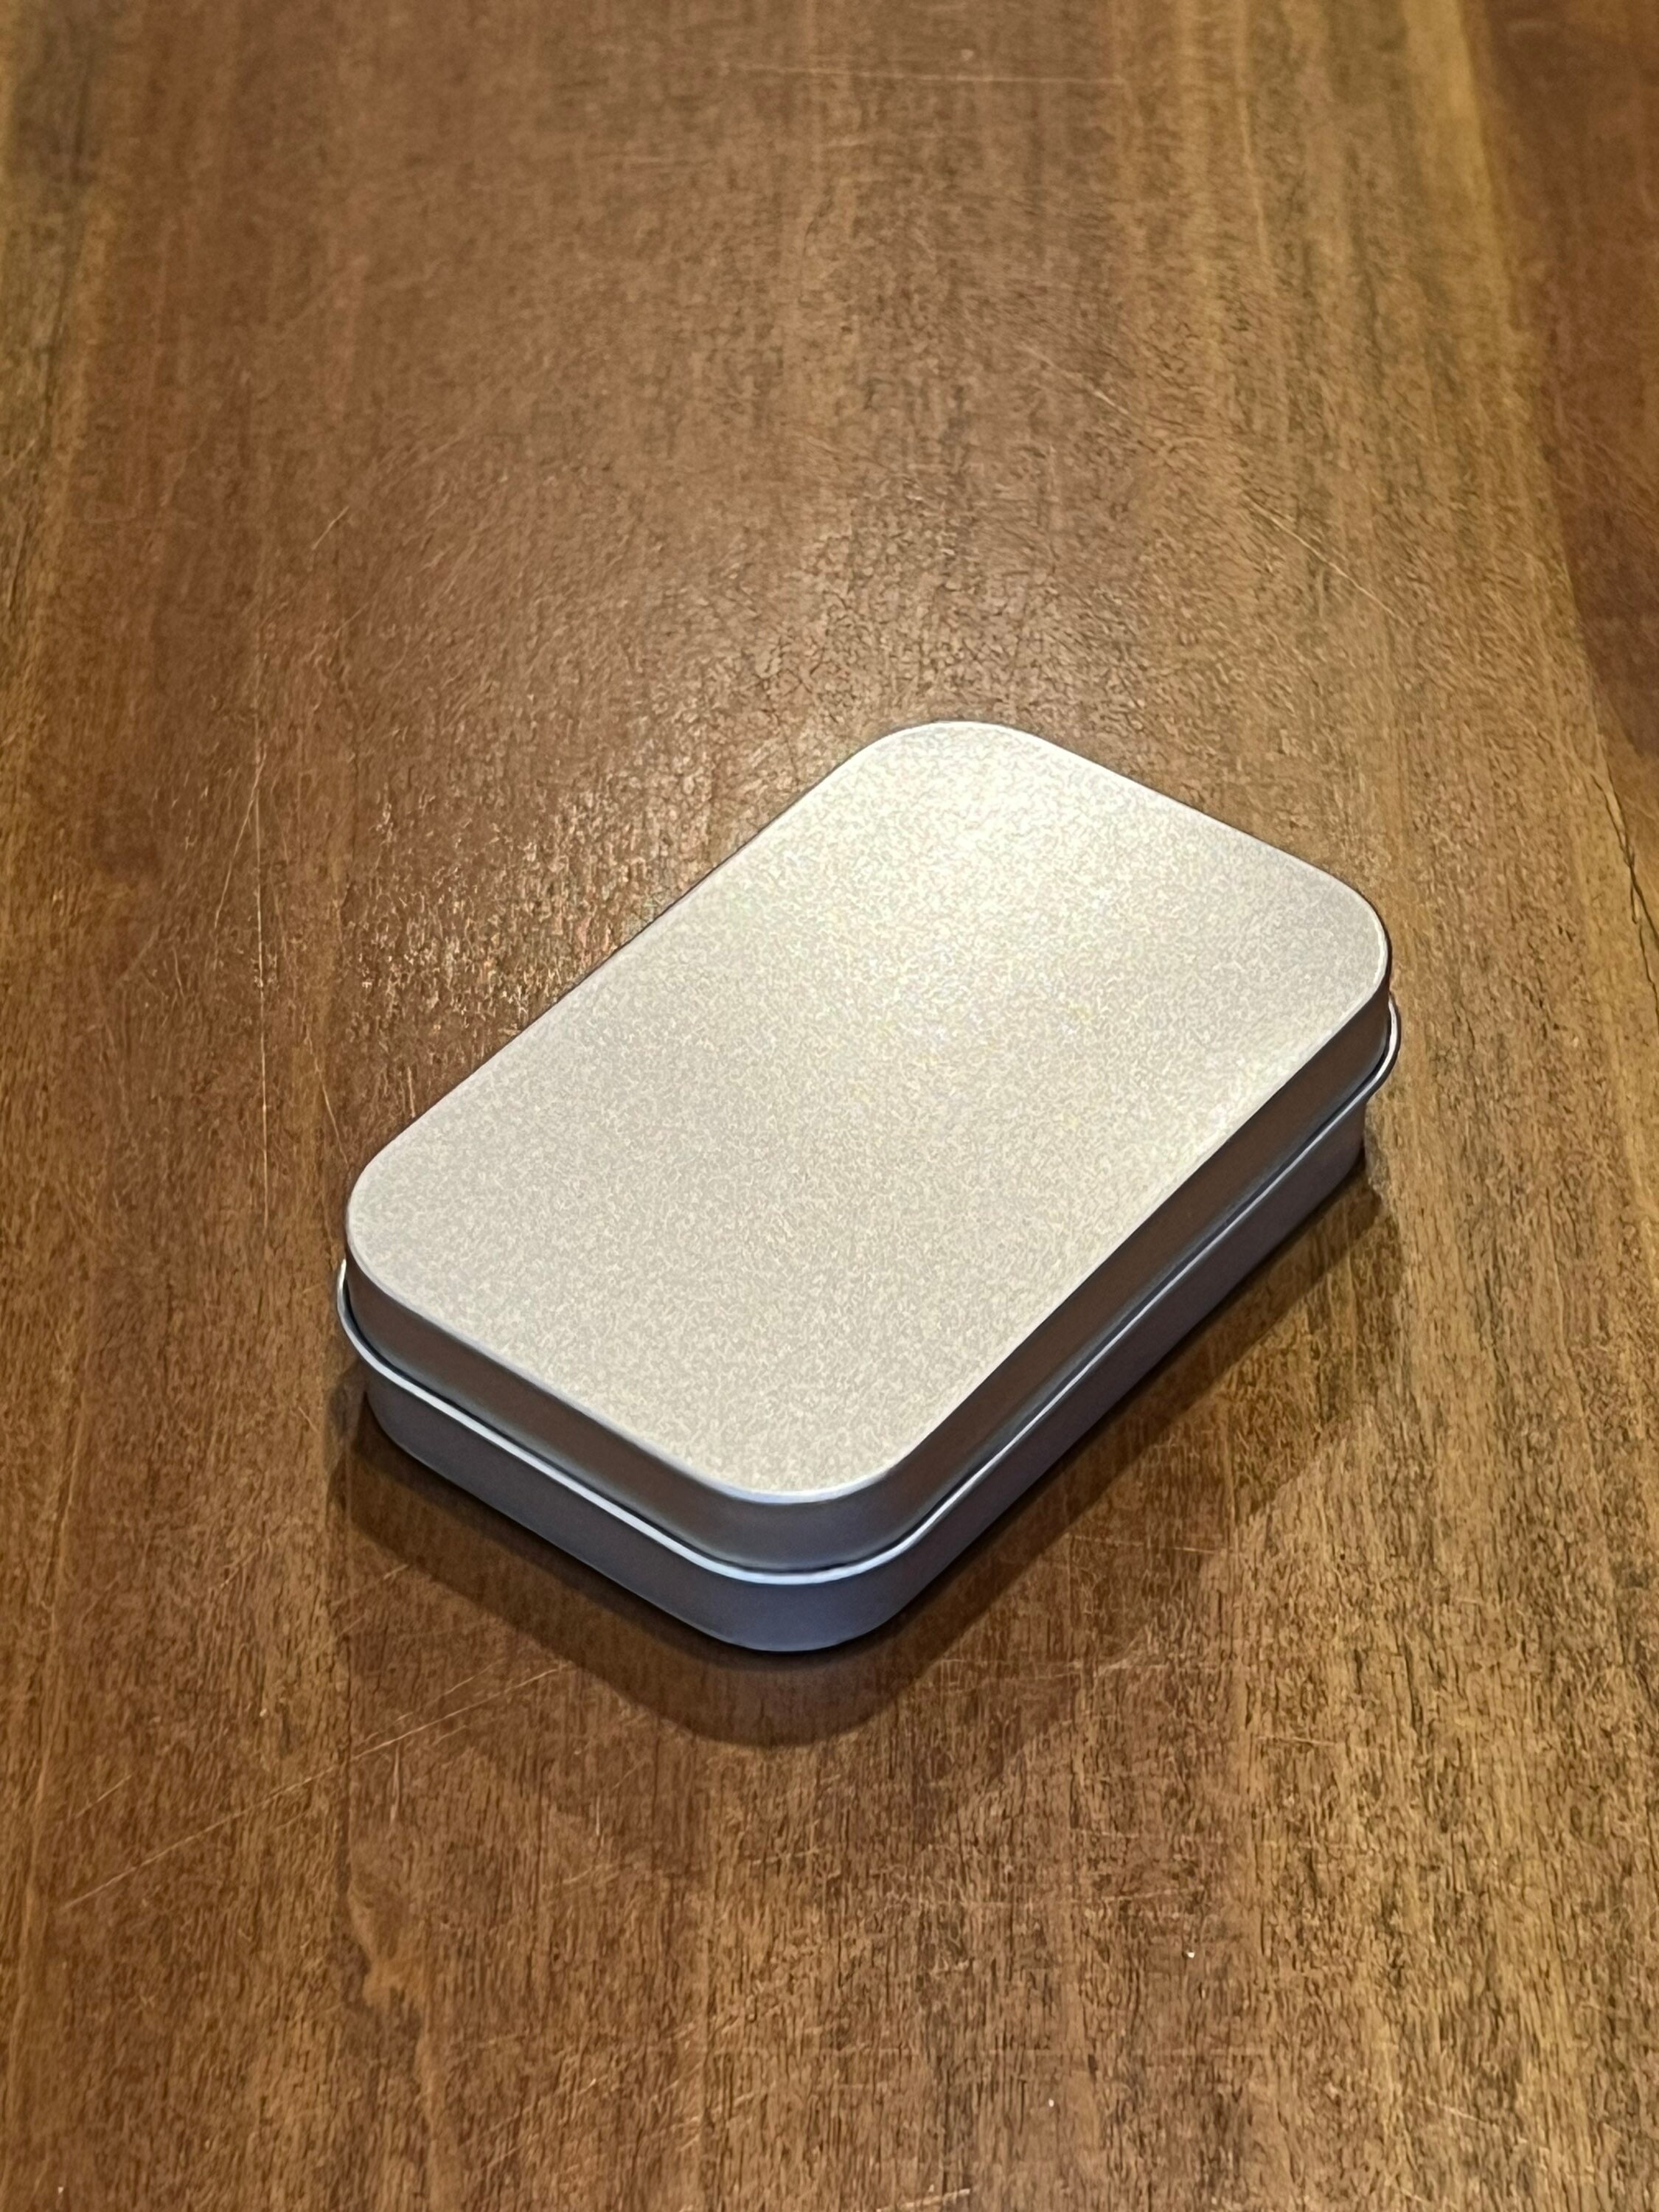 Transforming an Altoid Tin into a mini First Aid Kit – Weekends in